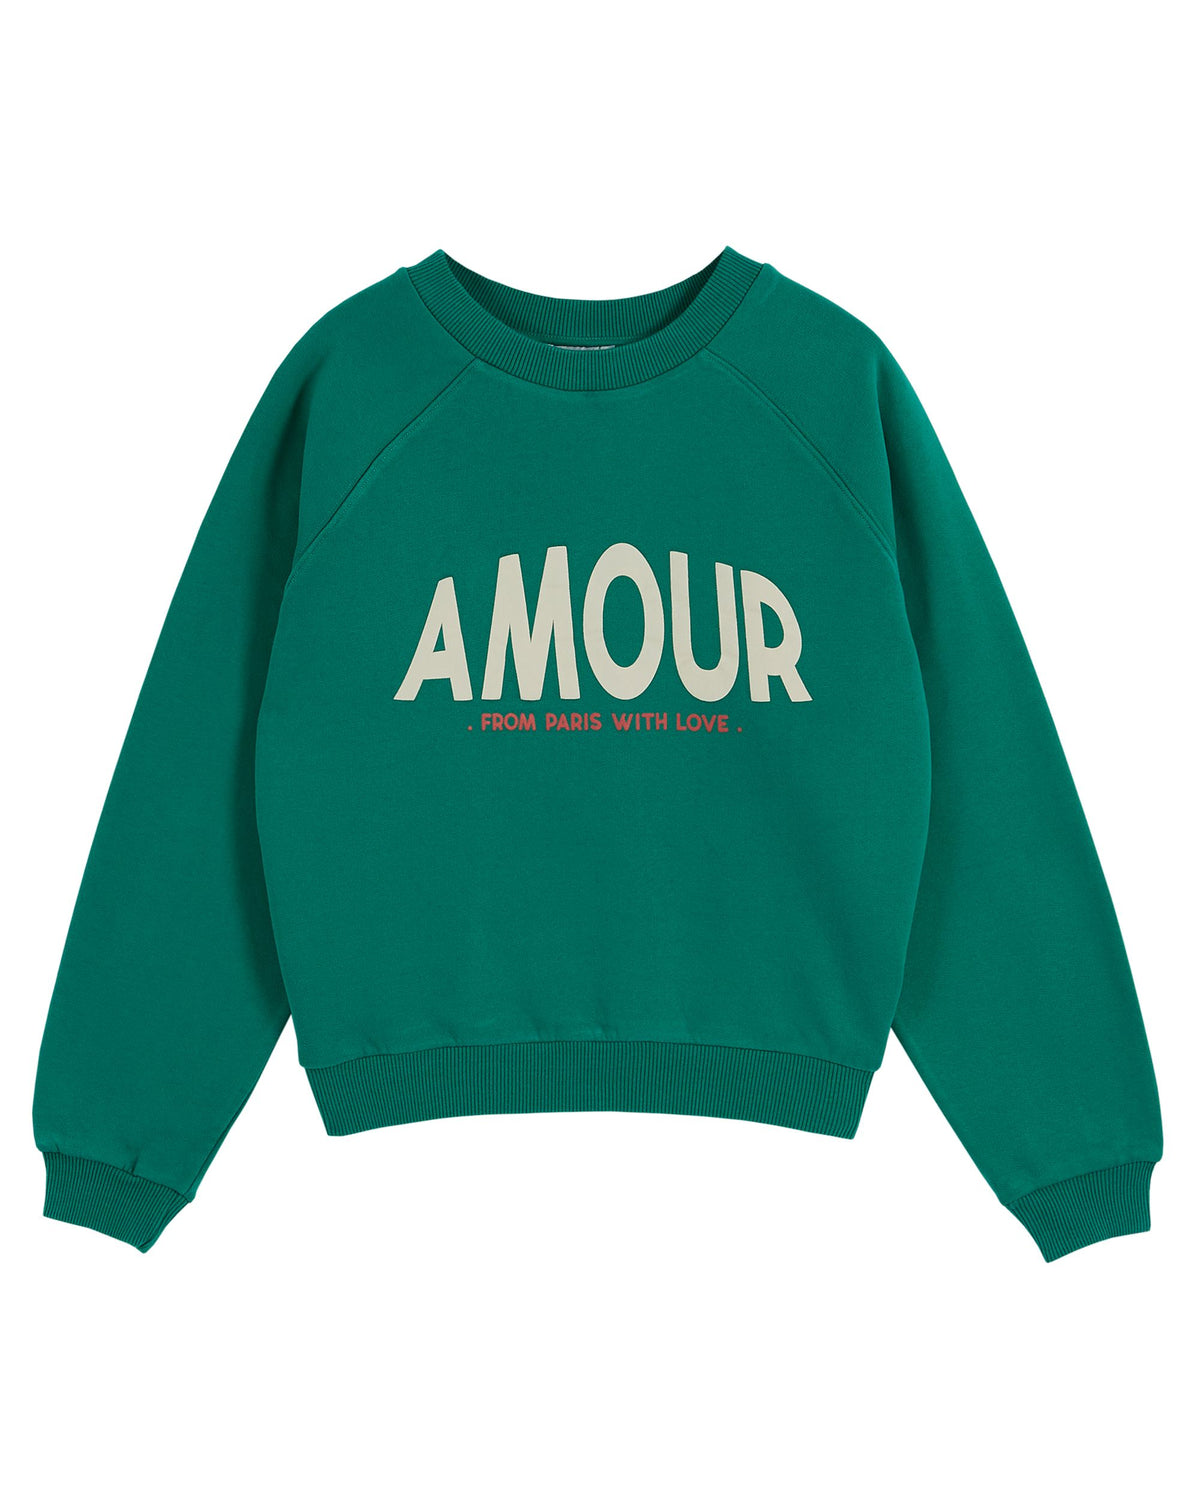 Jade green scoop neck sweatshirt with raglan sleeves and "amour" logo on the centre front